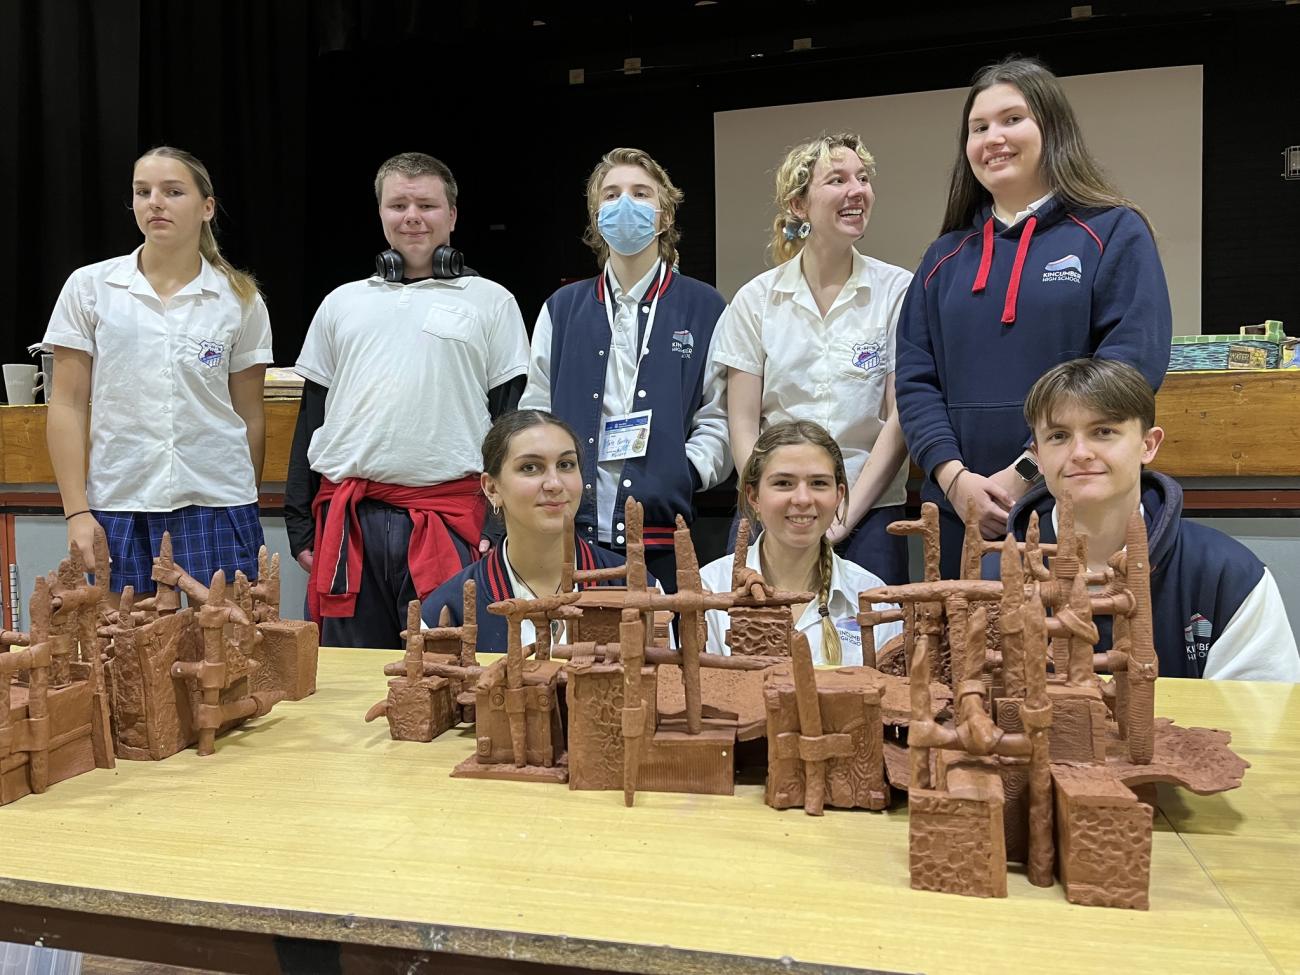 Eight students photographed standing with collaborative clay sculpture